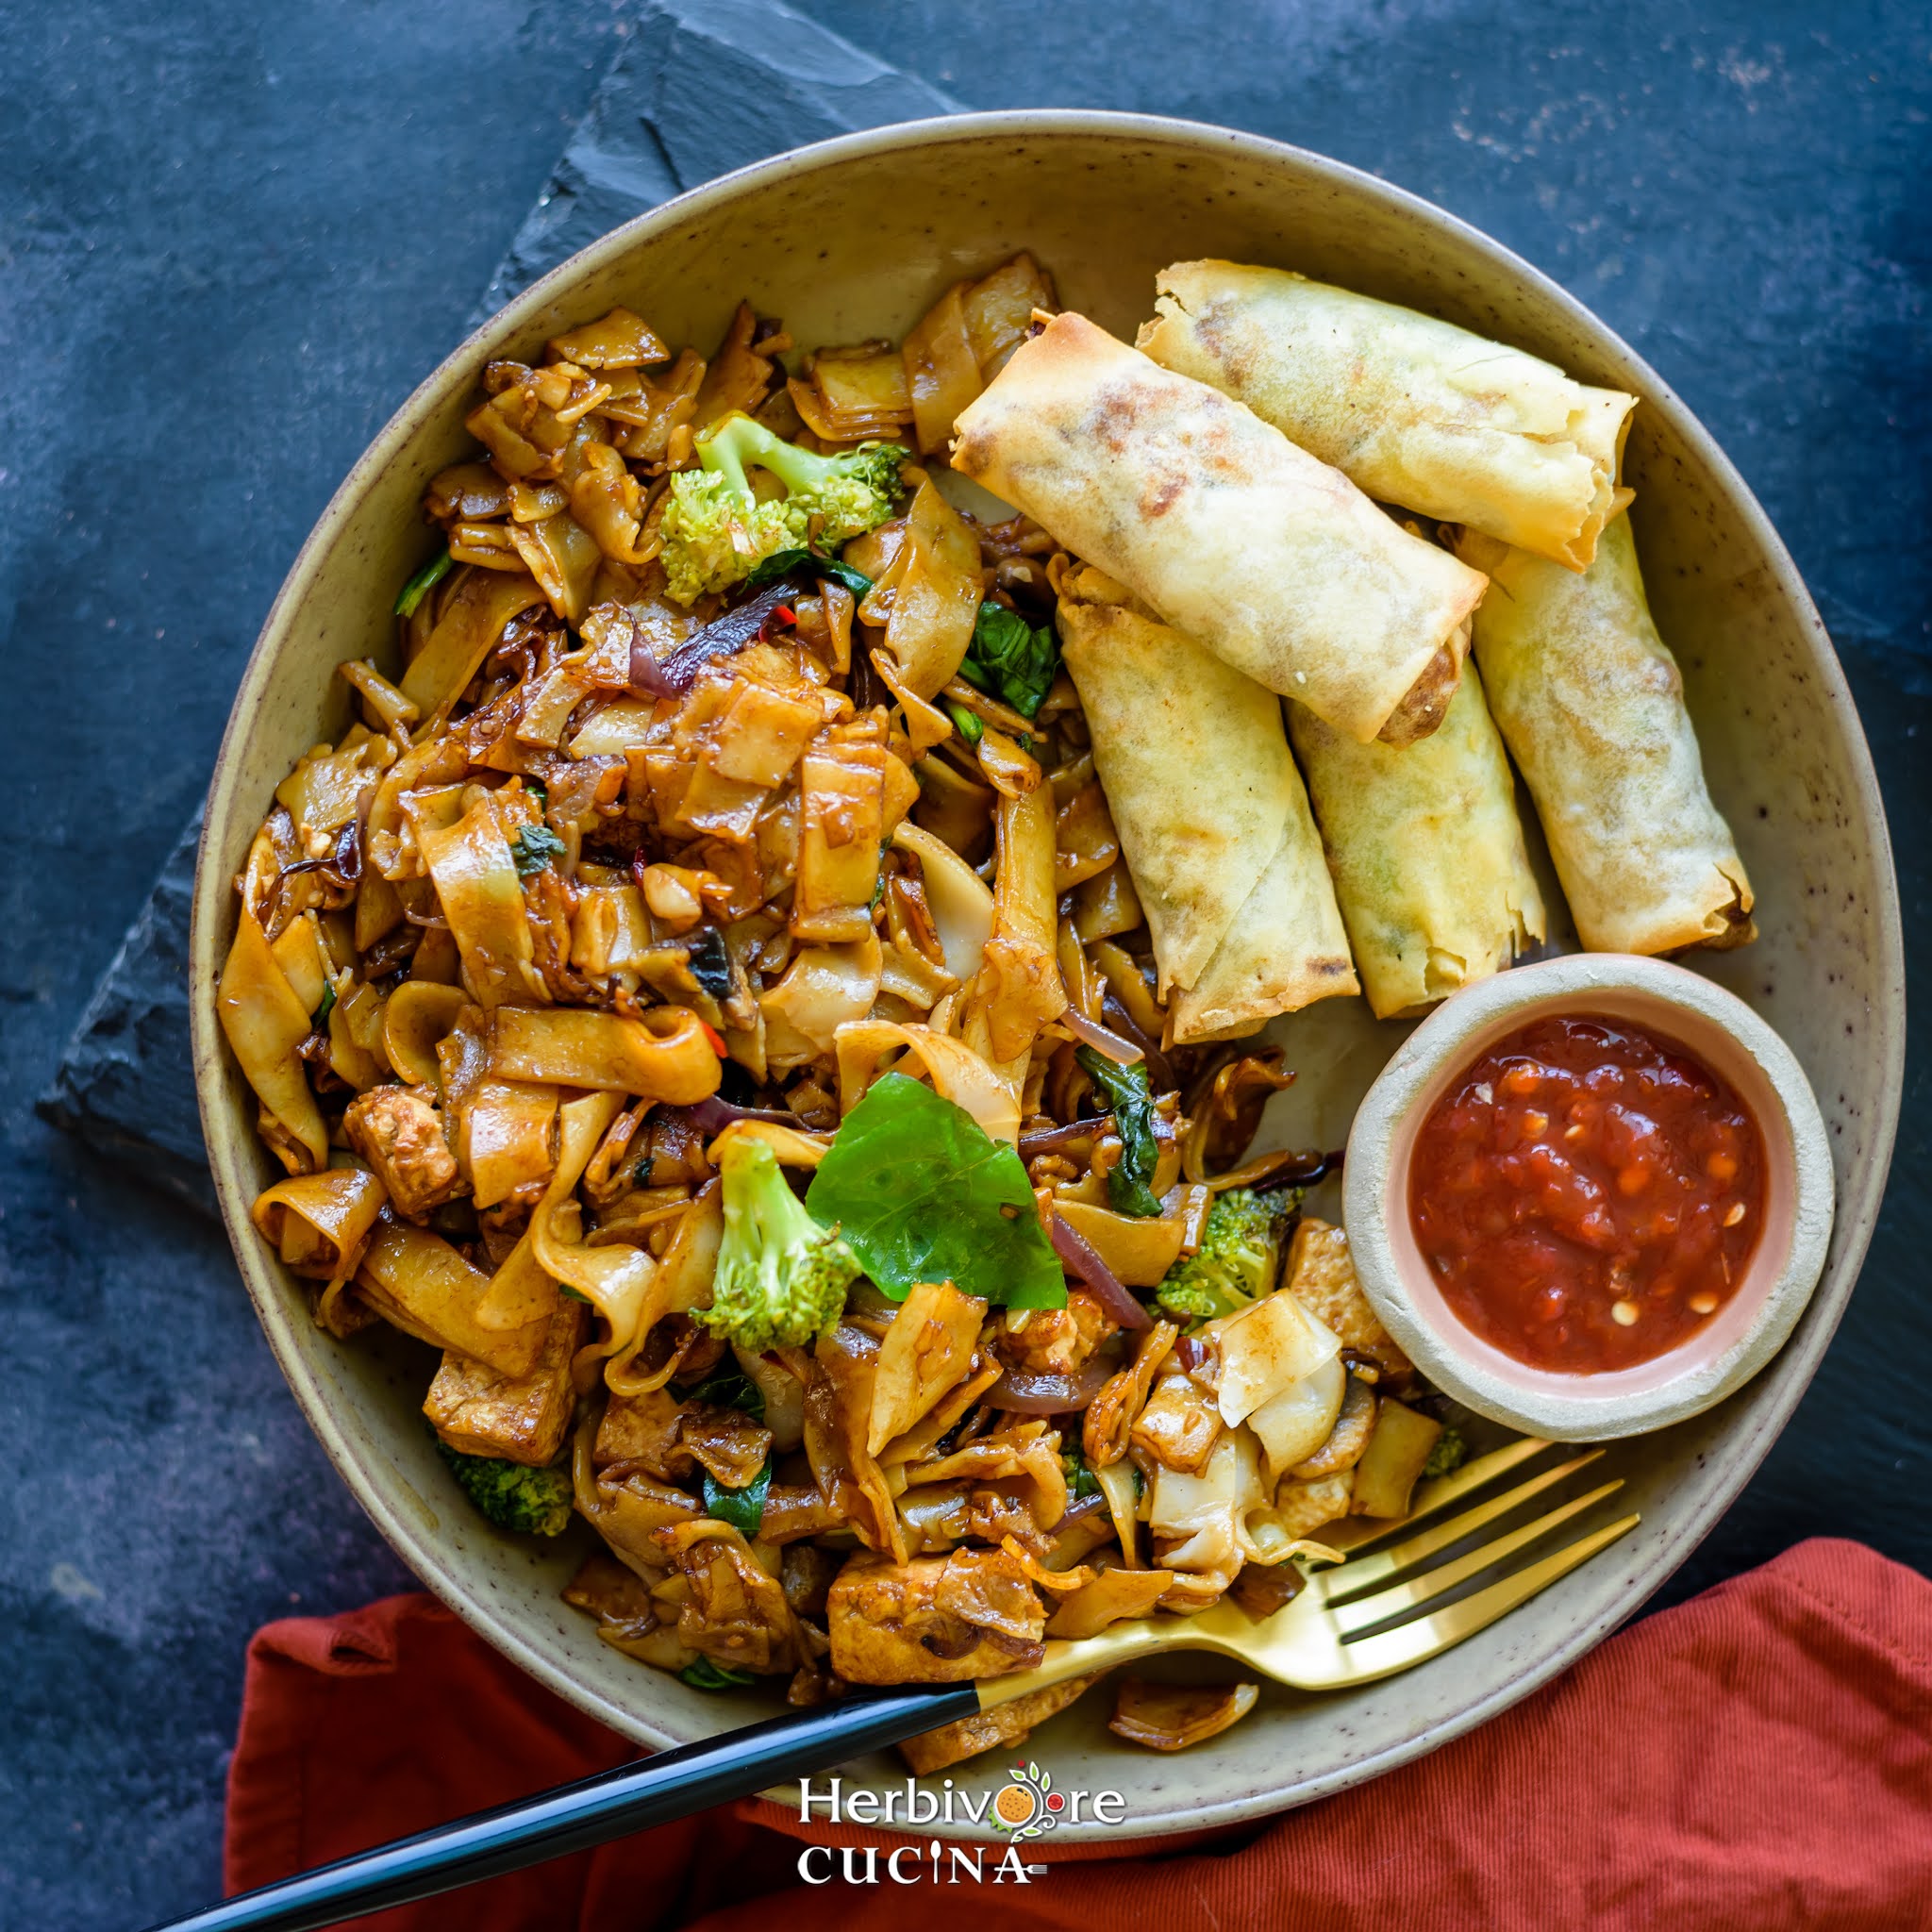 Drunken Noodles in a plate with egg rolls and sauce